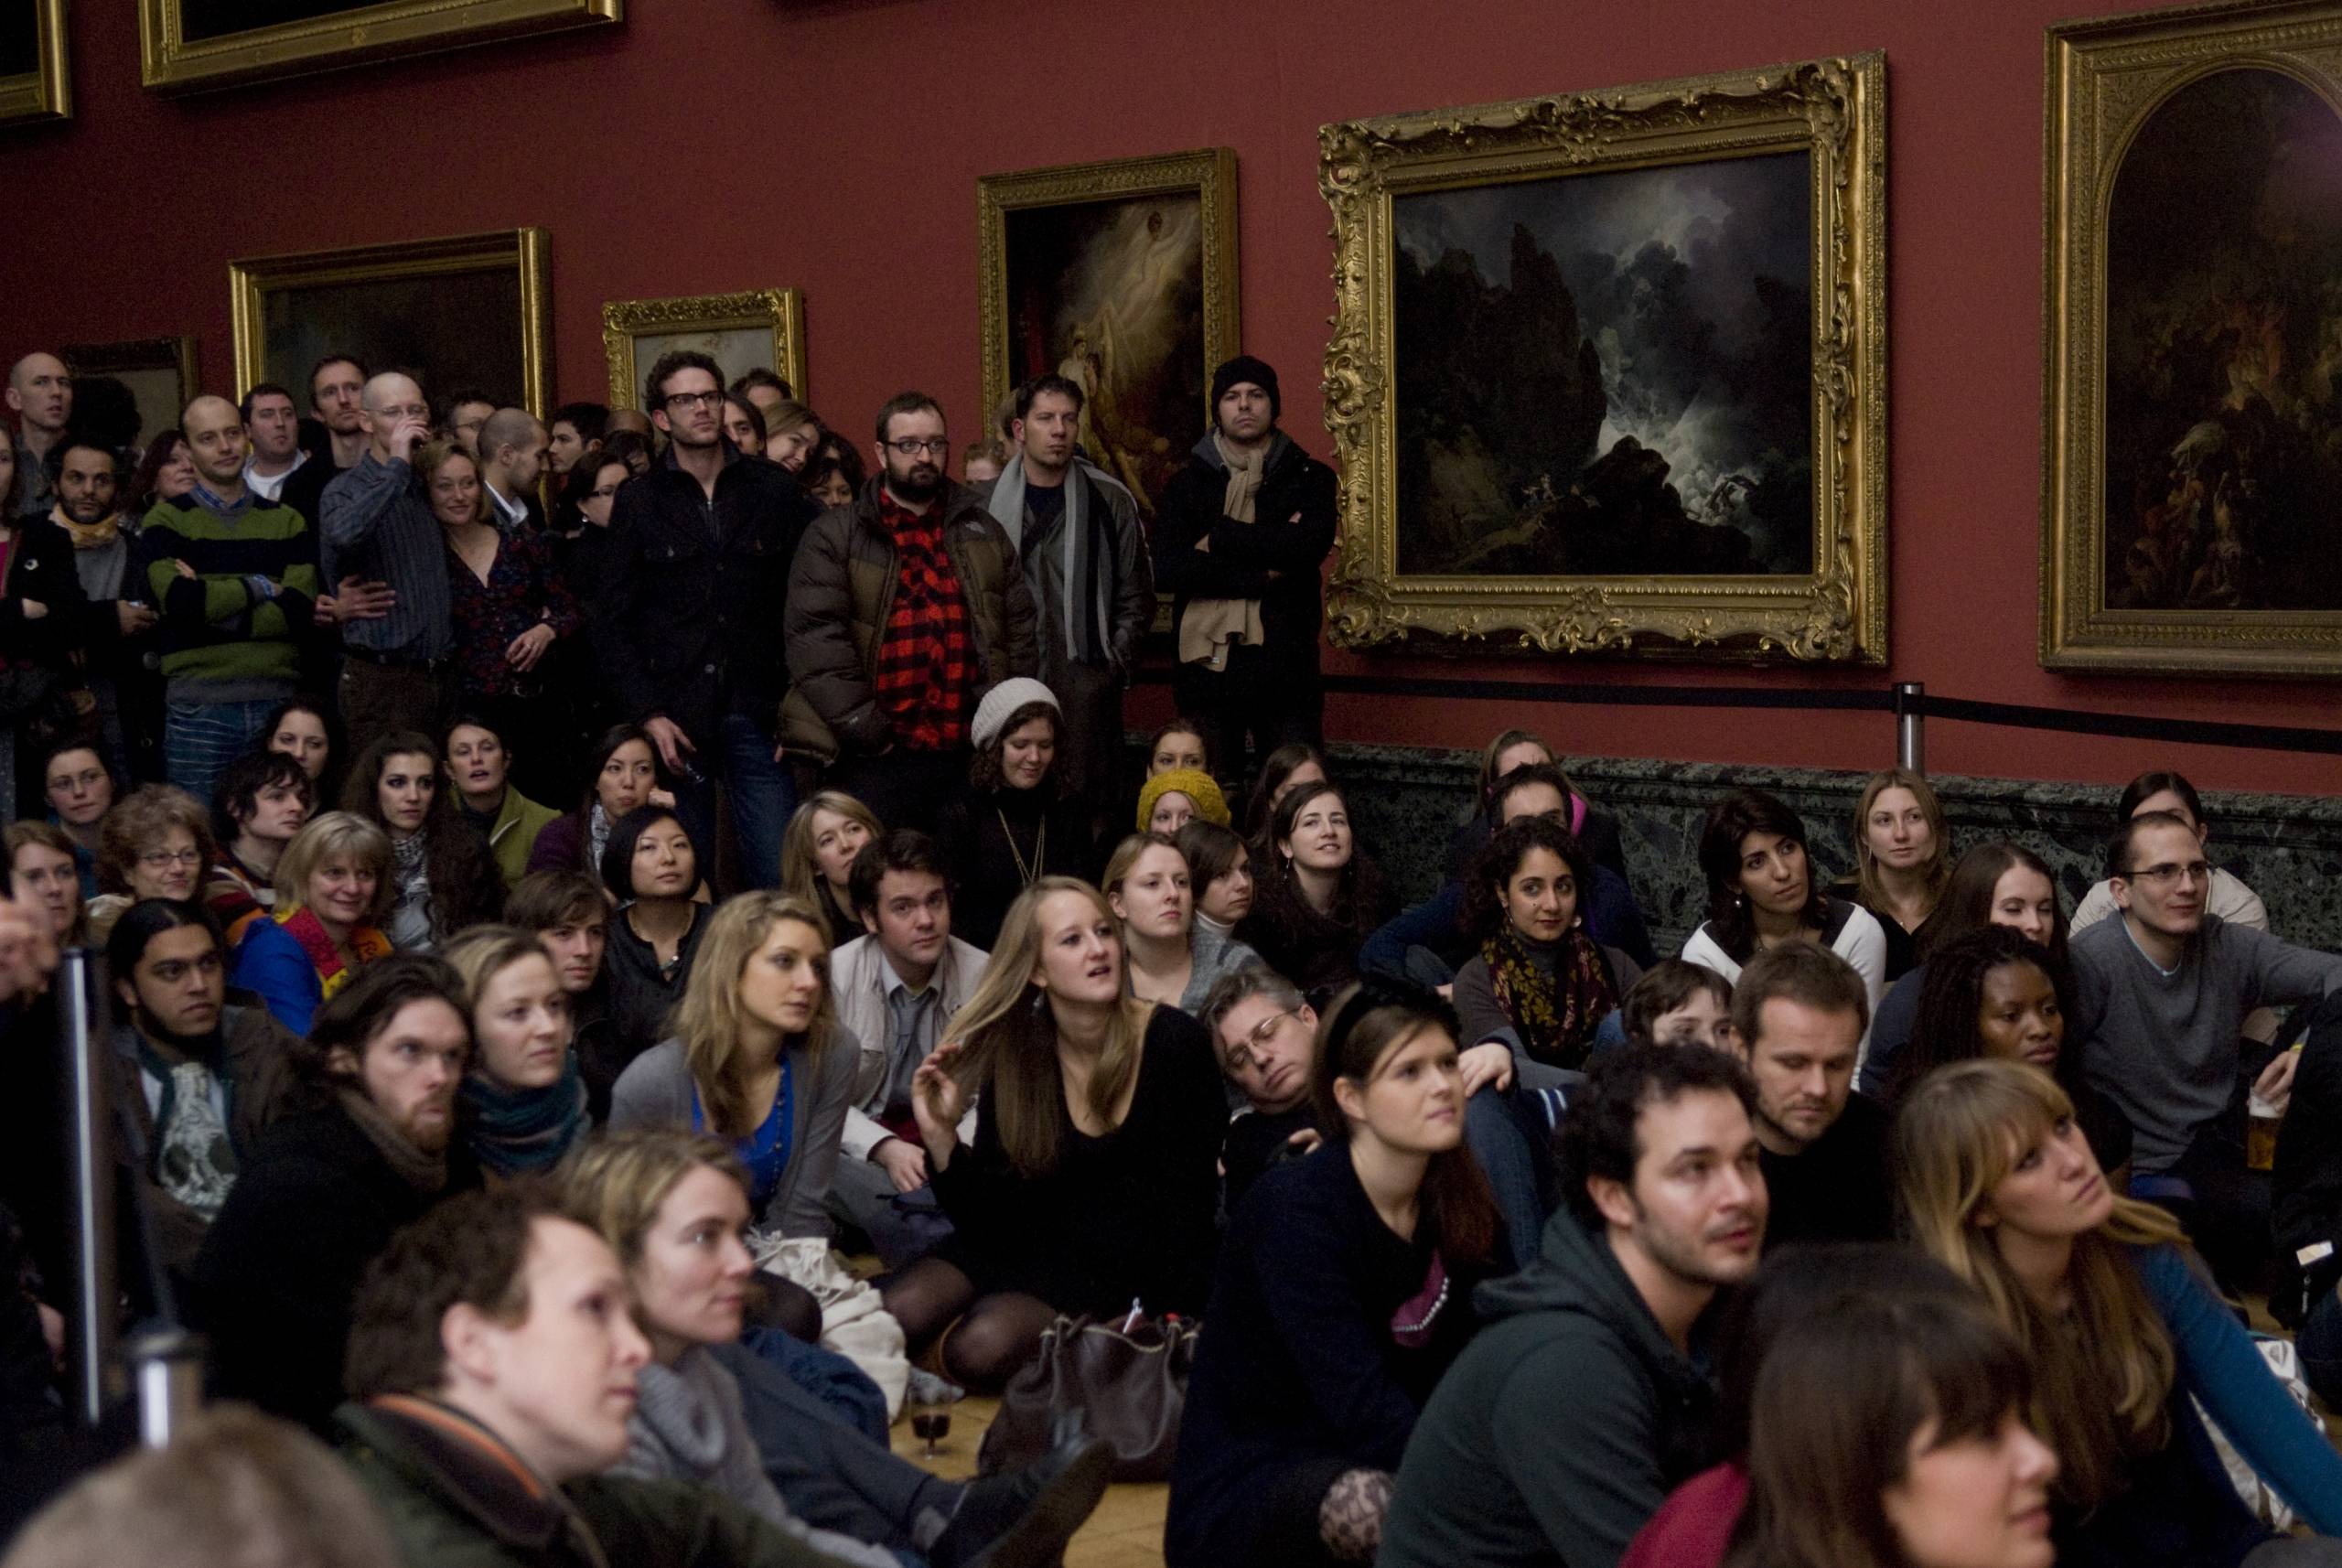 audiences during Cape Farewell's Late at Tate